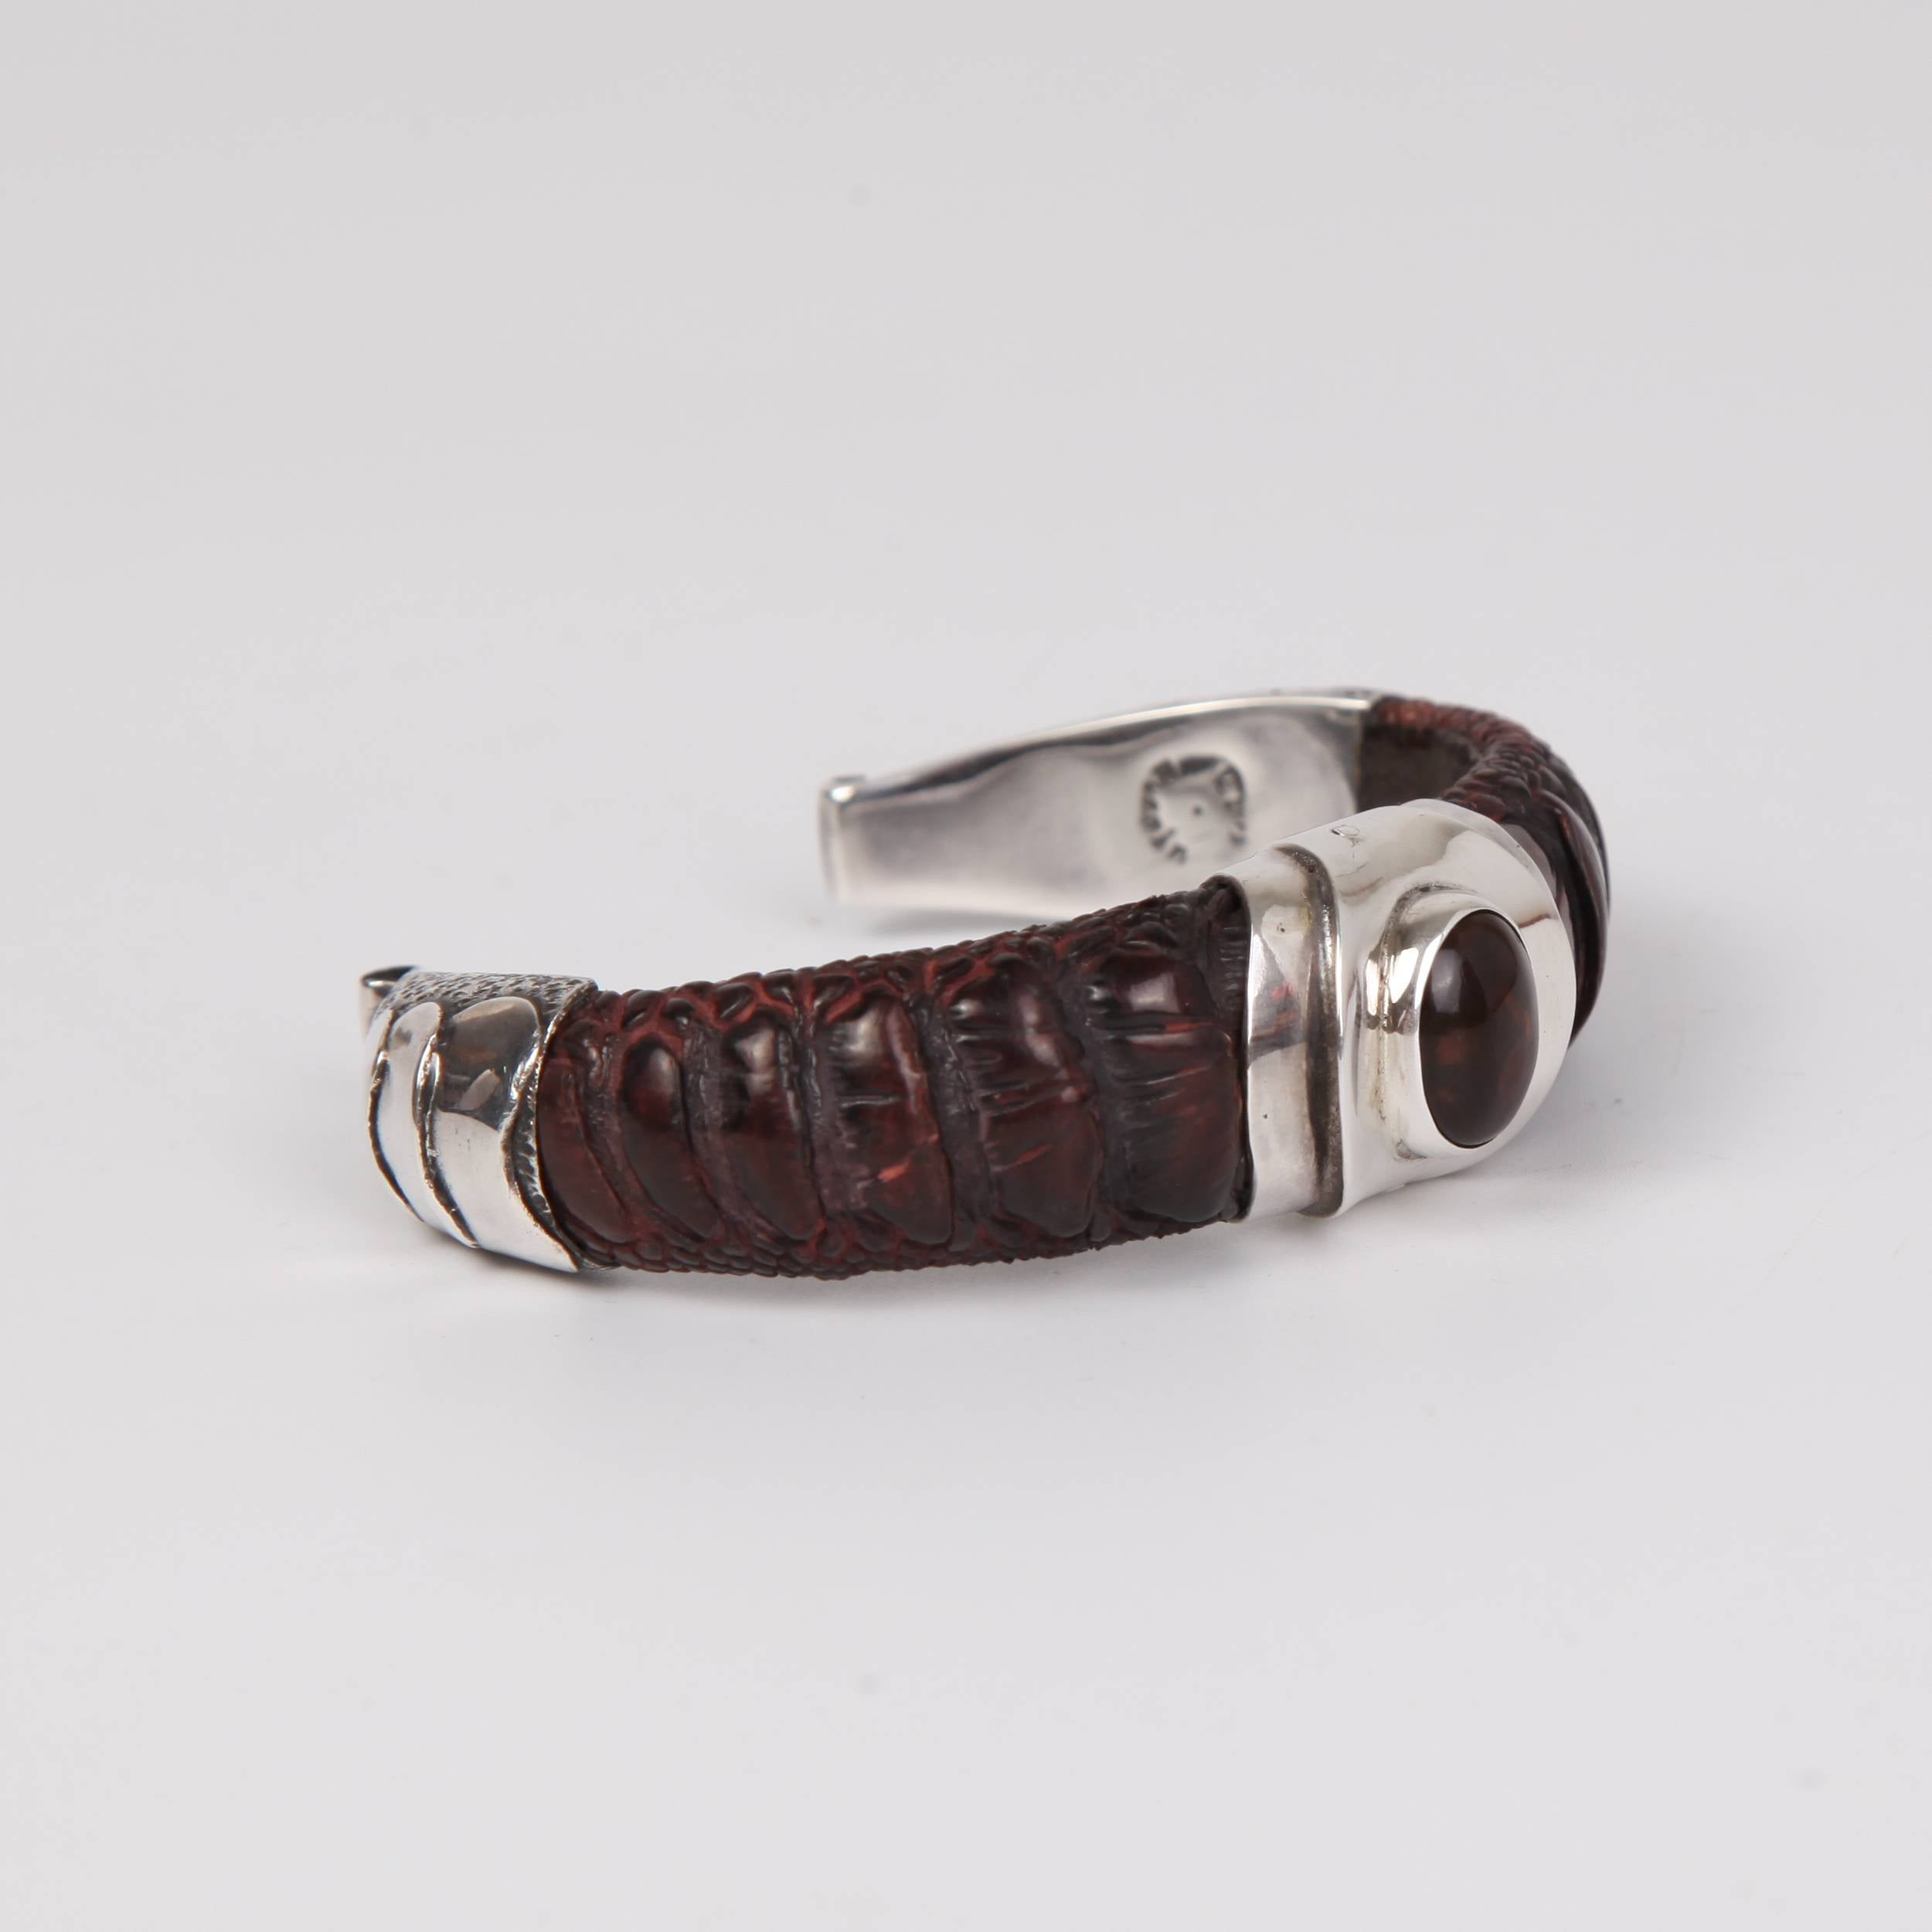 Leather (Ostrich toe skin) Bracelet with Sterling Silver and Fire Agate